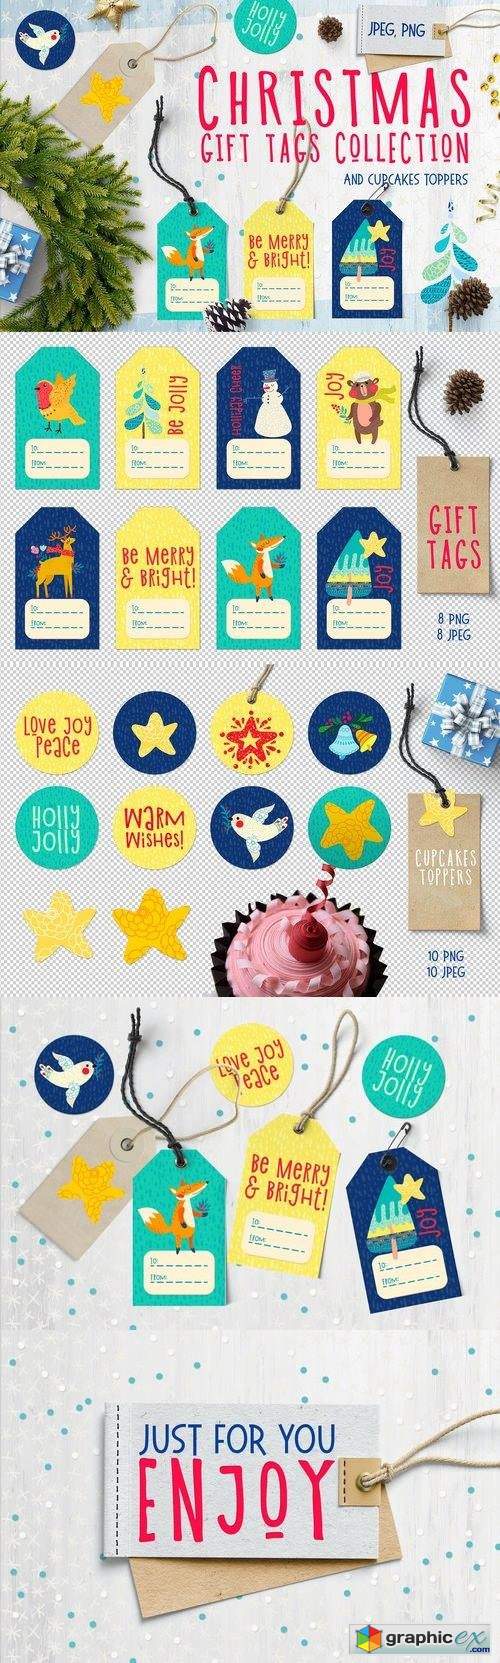 Christmas Gift Tag, cupcakes toppers